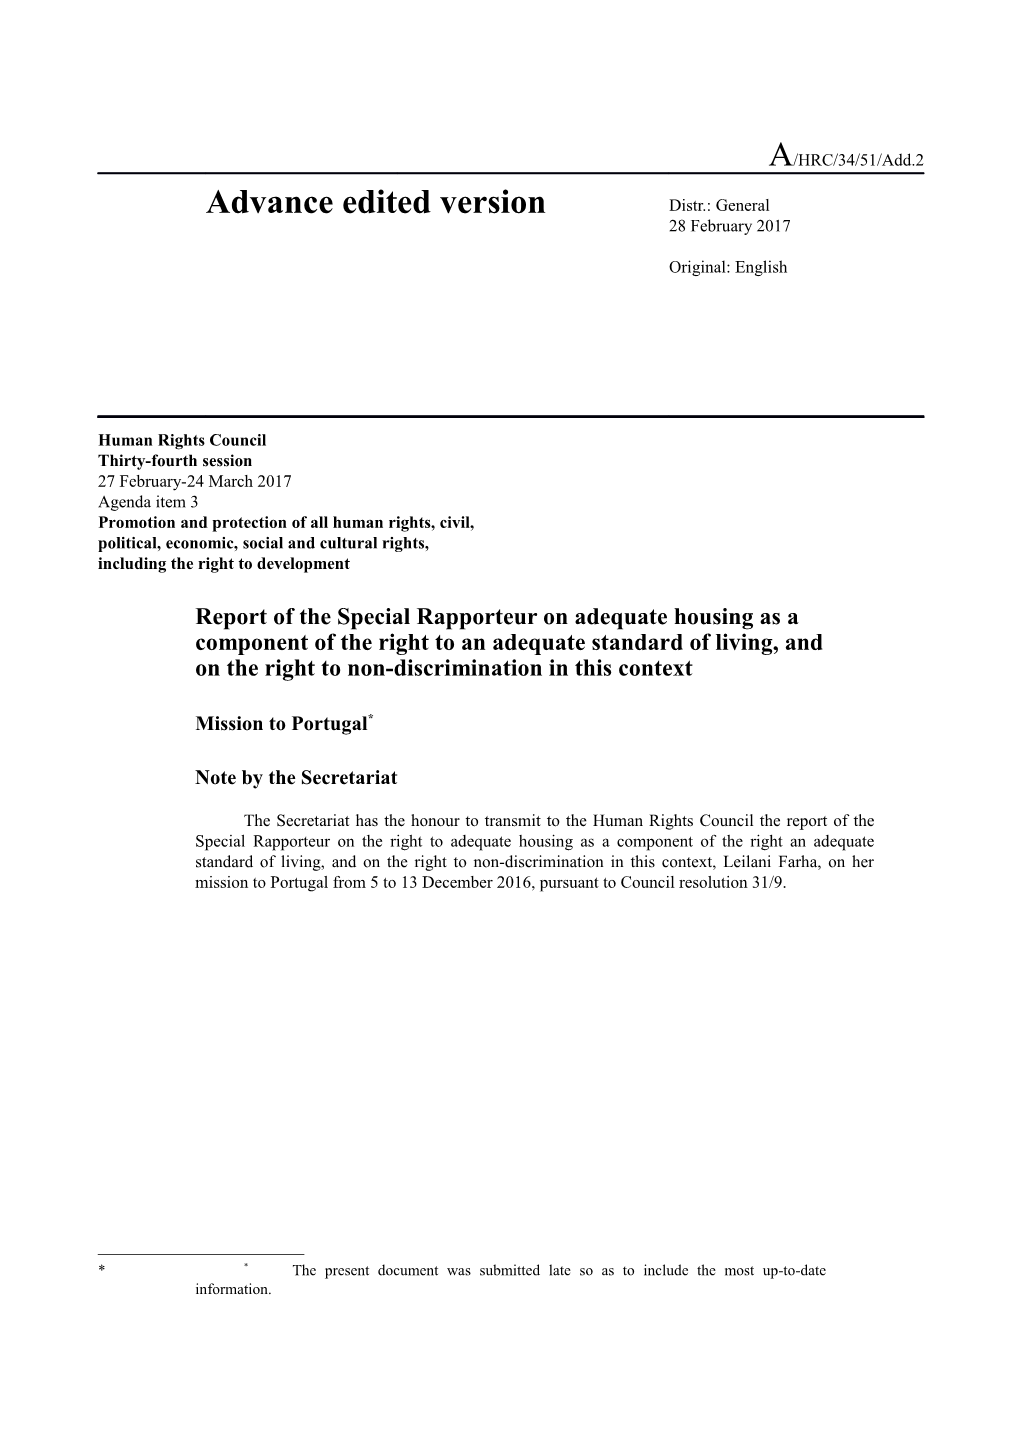 Report of the Special Rapporteur on Adequate Housing - Mission to Portugal in English